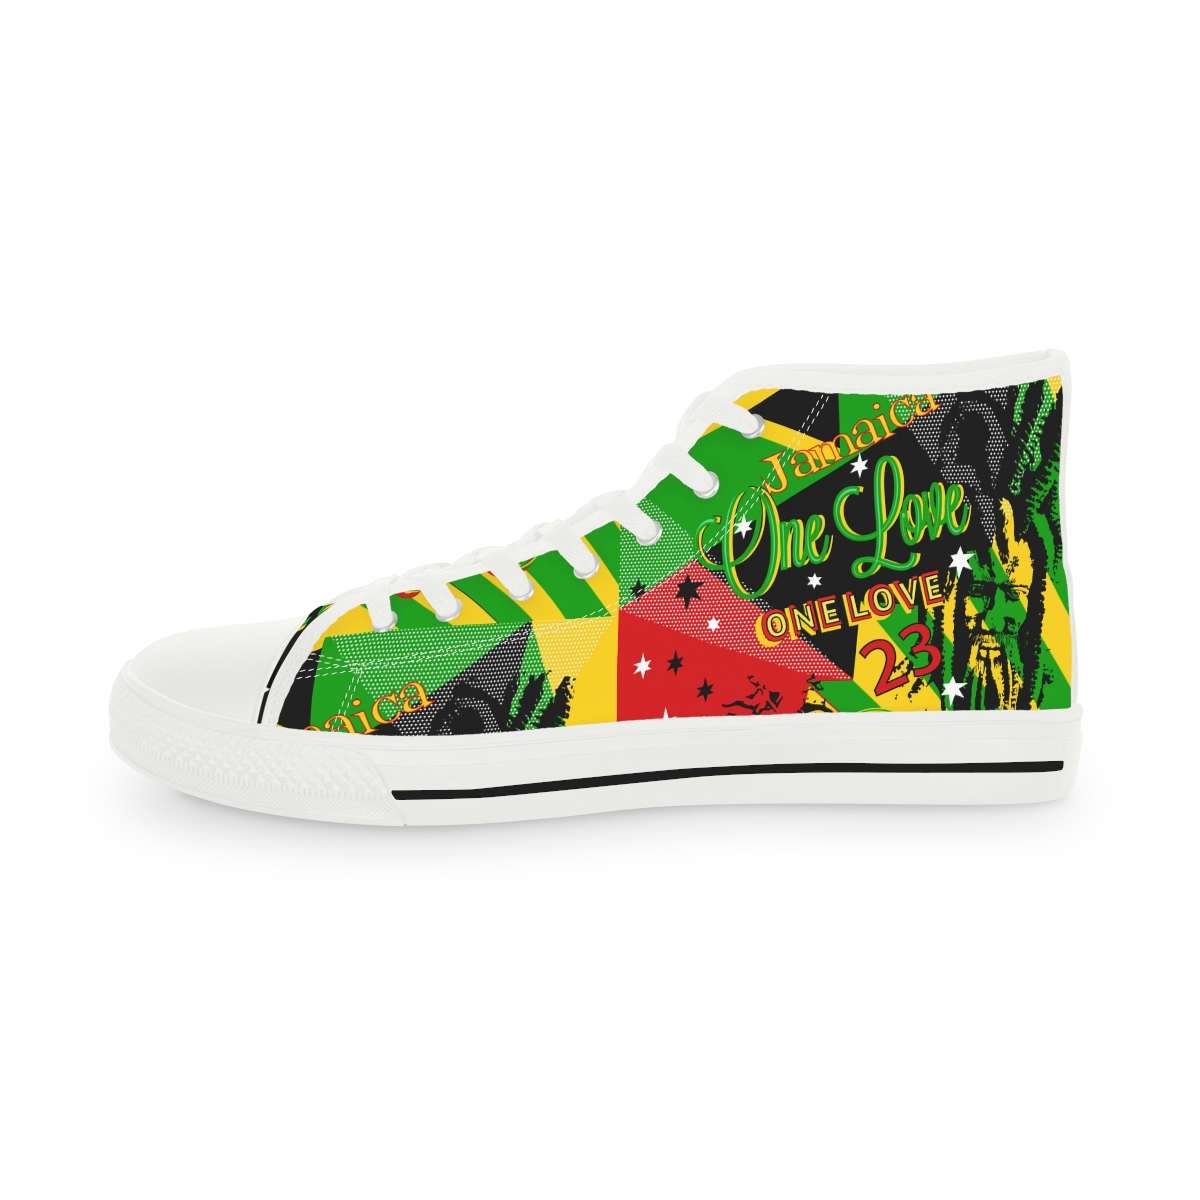 Rasta Reggae Party Men's High Top Sneakers in the Reggae colors right inside view white sole